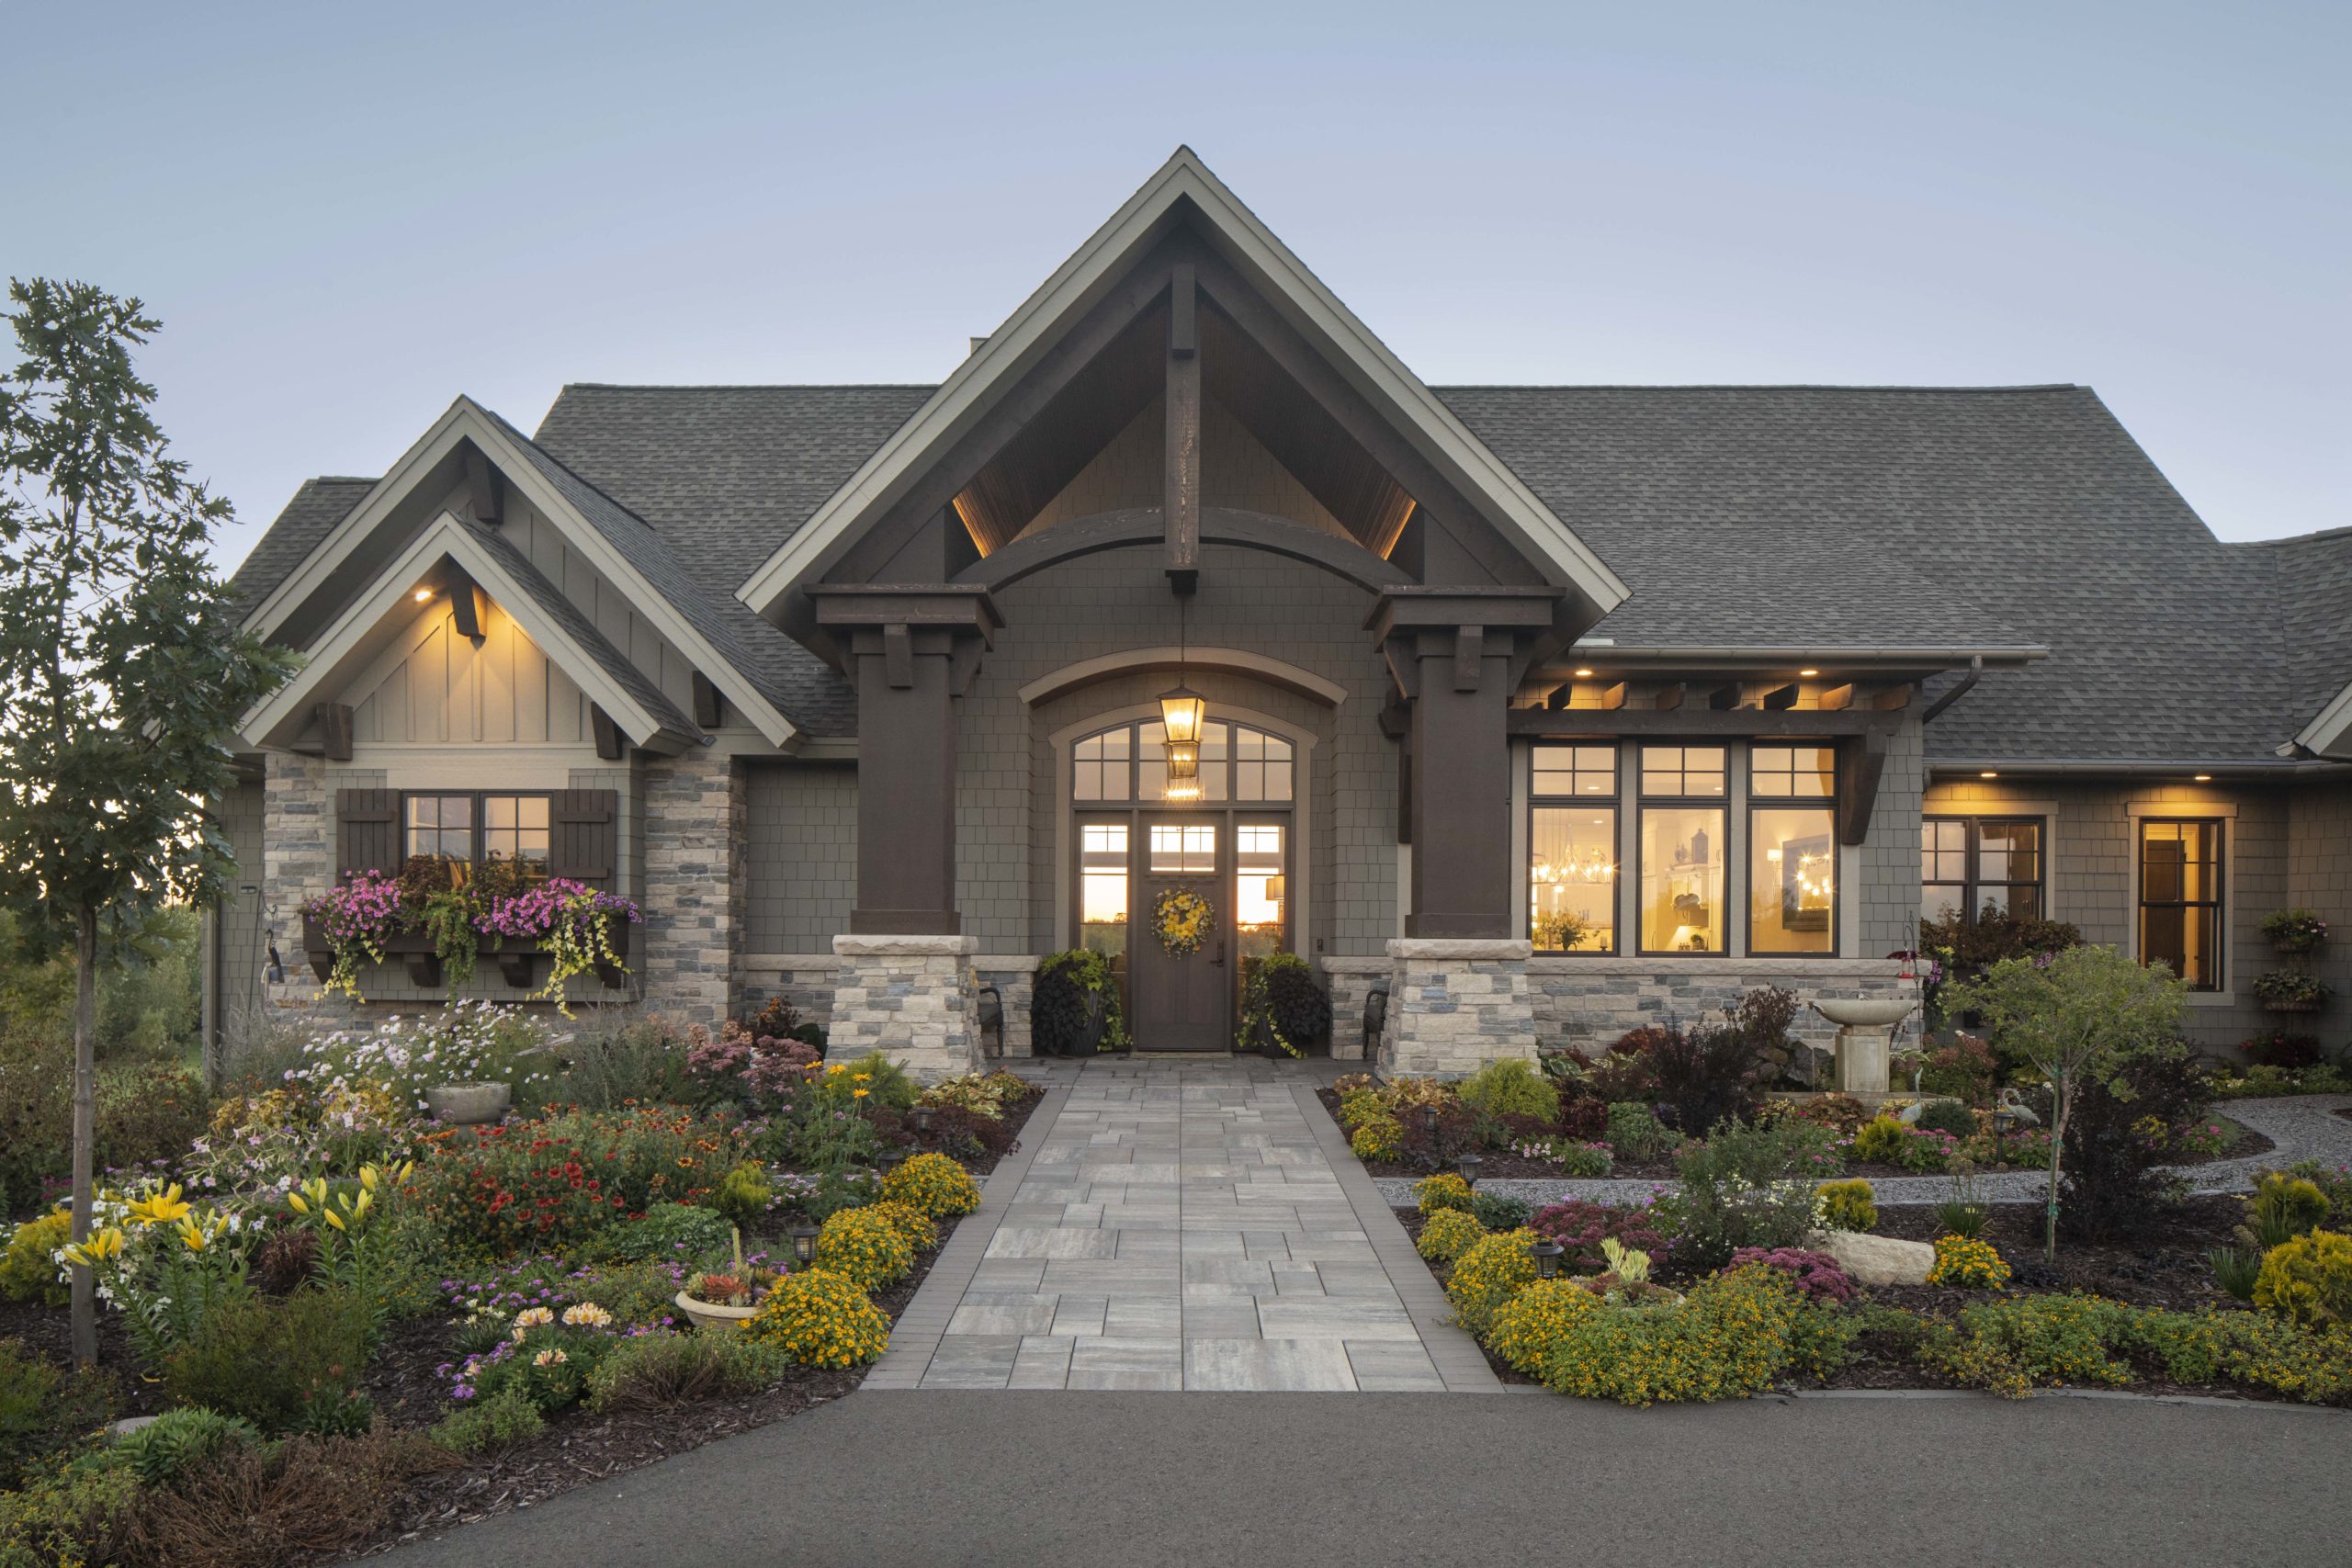 A beautiful prairie transitional home with a stone driveway and custom landscaping.